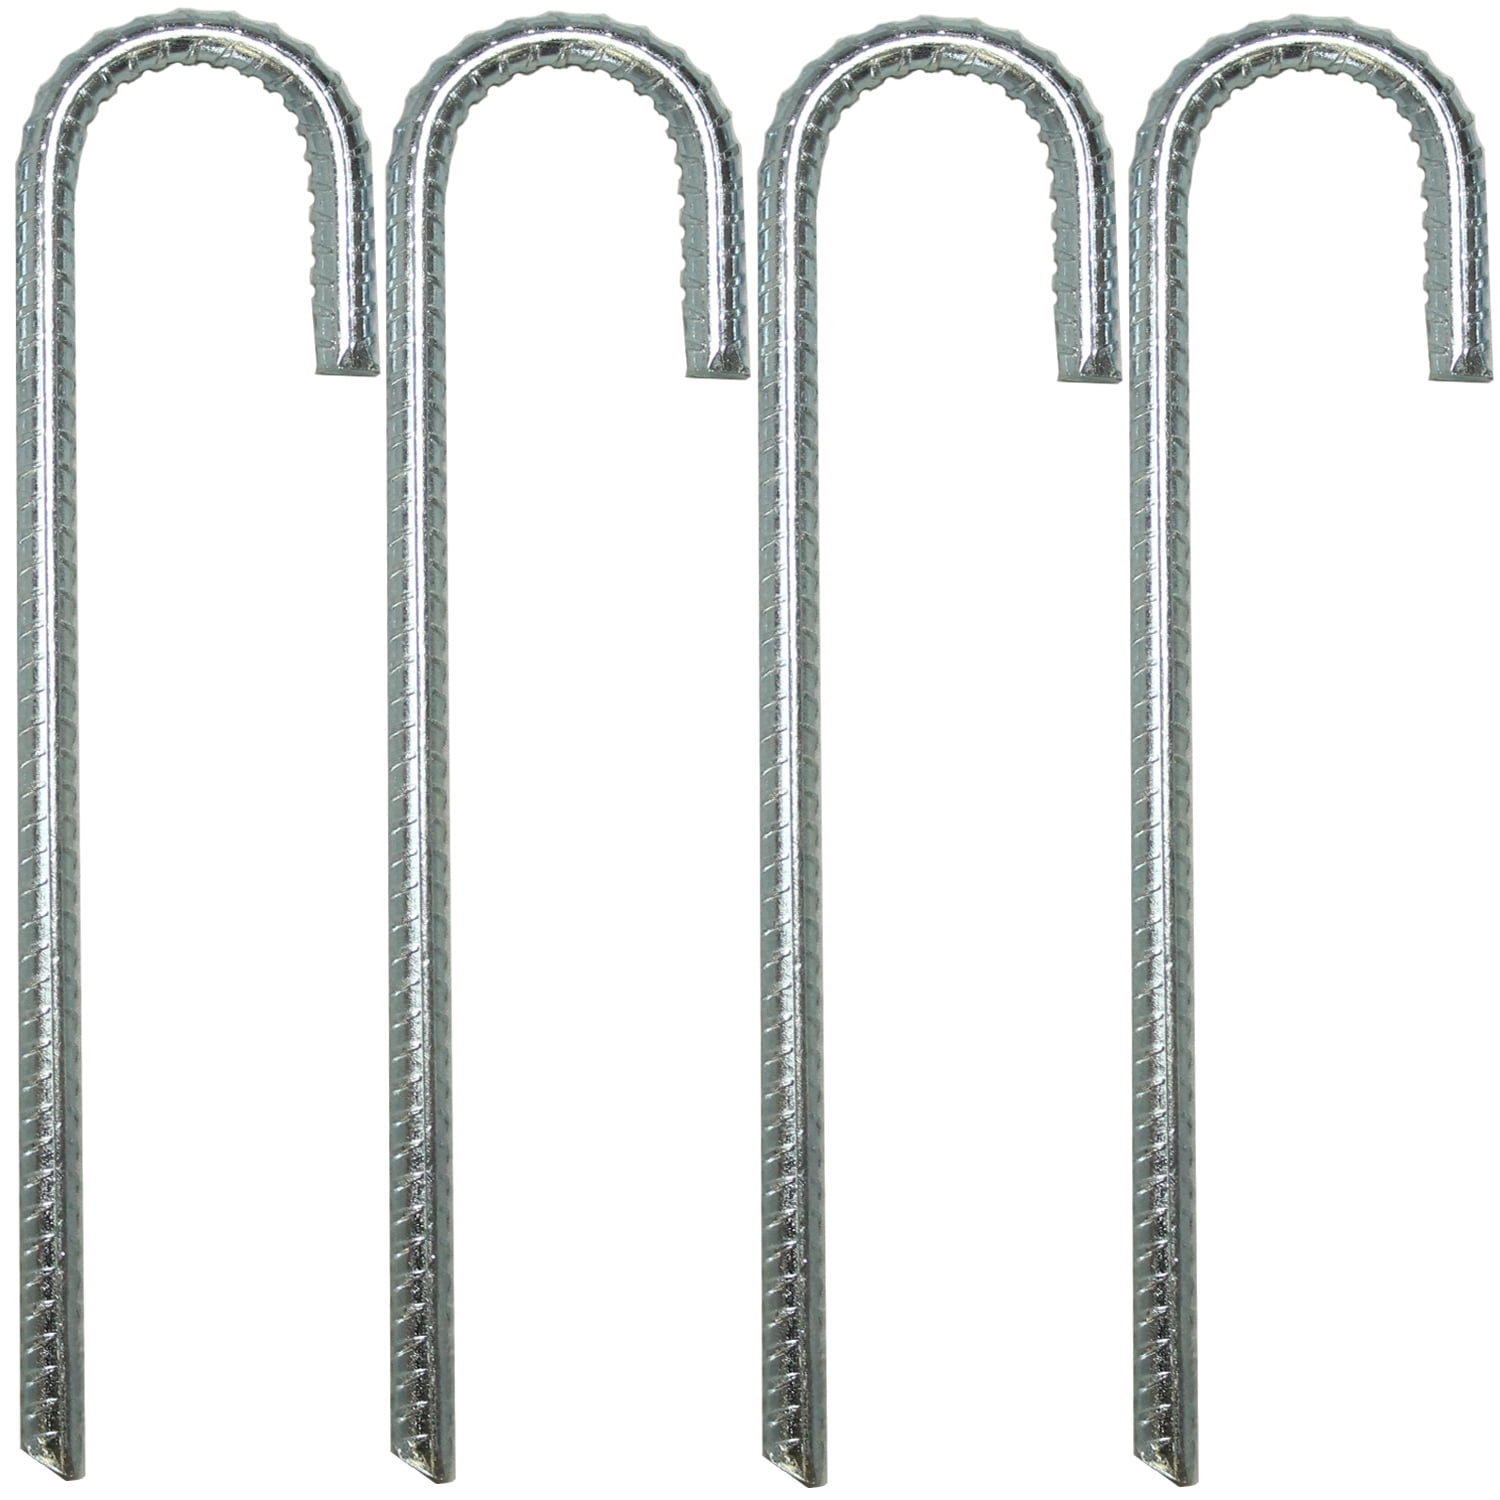 10 Pack Tent Stakes Galvanized Steel 10-1/2" Long 5/16" Thick Camping Tie Down 